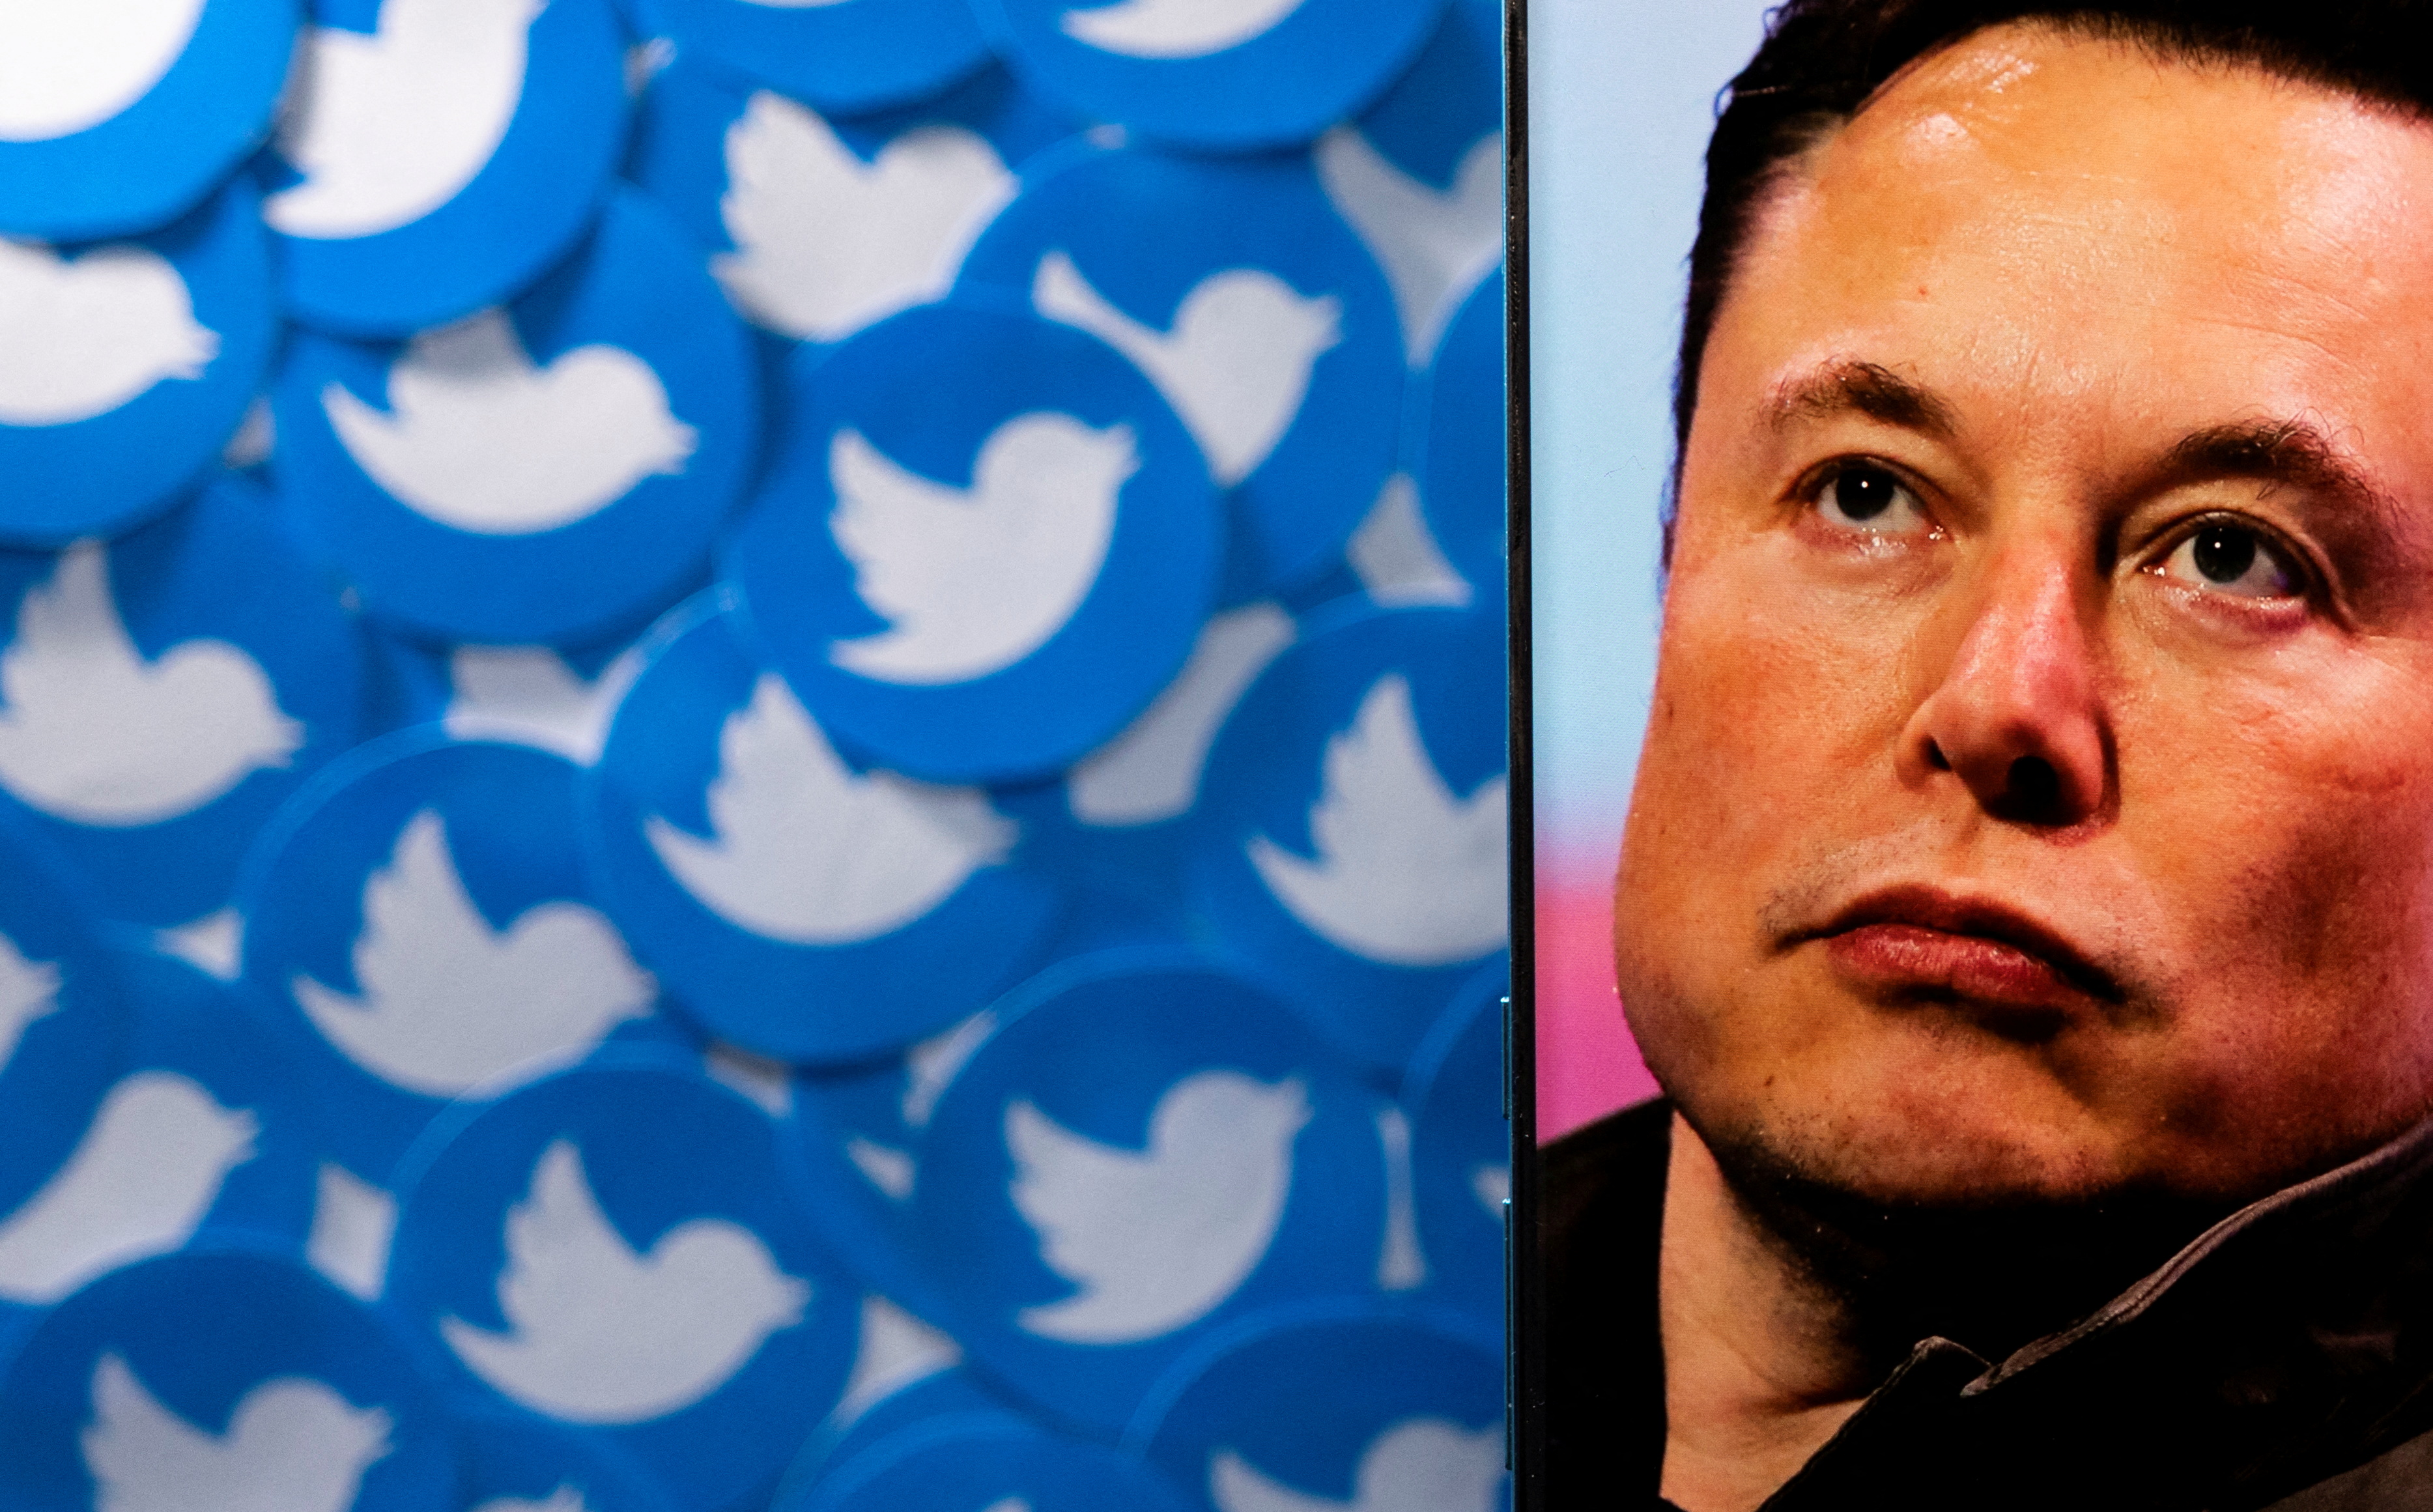 Elon Musk now gets busy counting fake, spammy accounts on Twitter